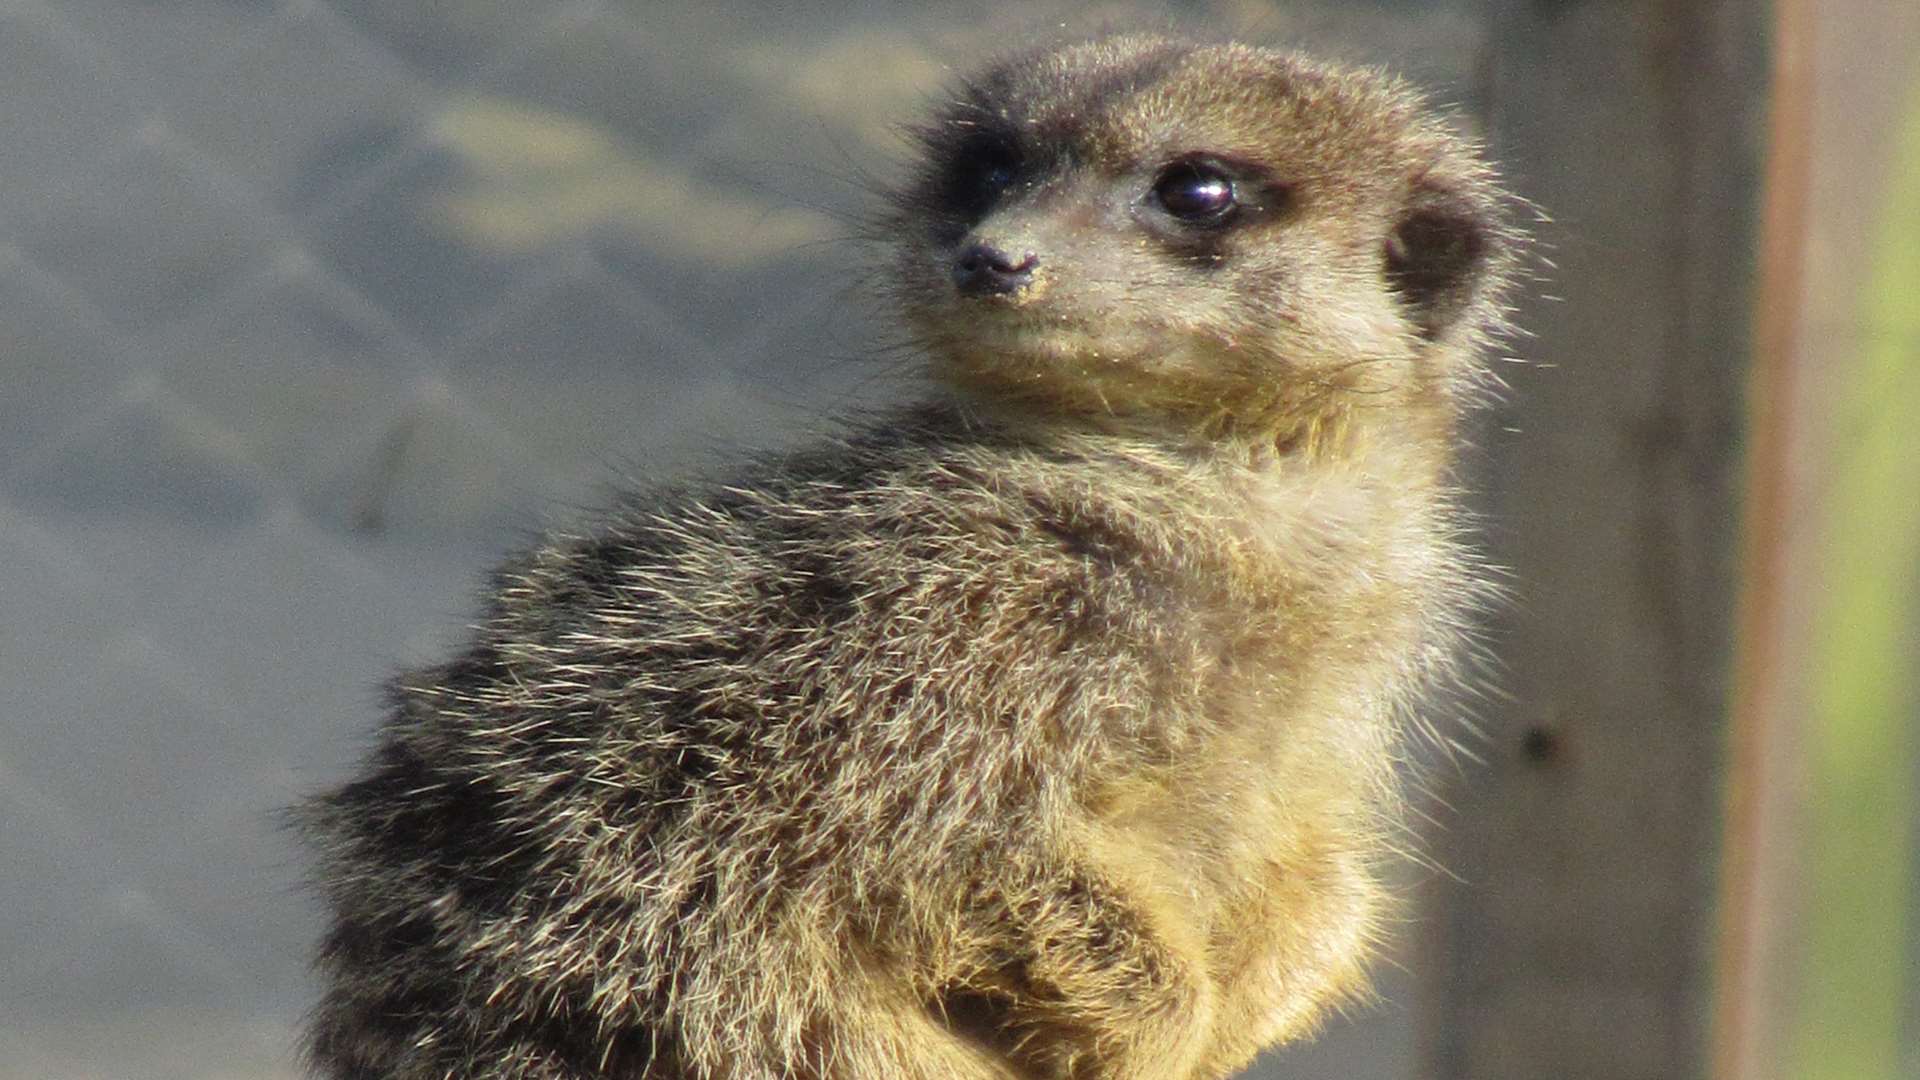 Wingham Wildlife Park, nominated for Tourism & Hospitality Business of the Year, has more species than any other park in Kent, including meerkats